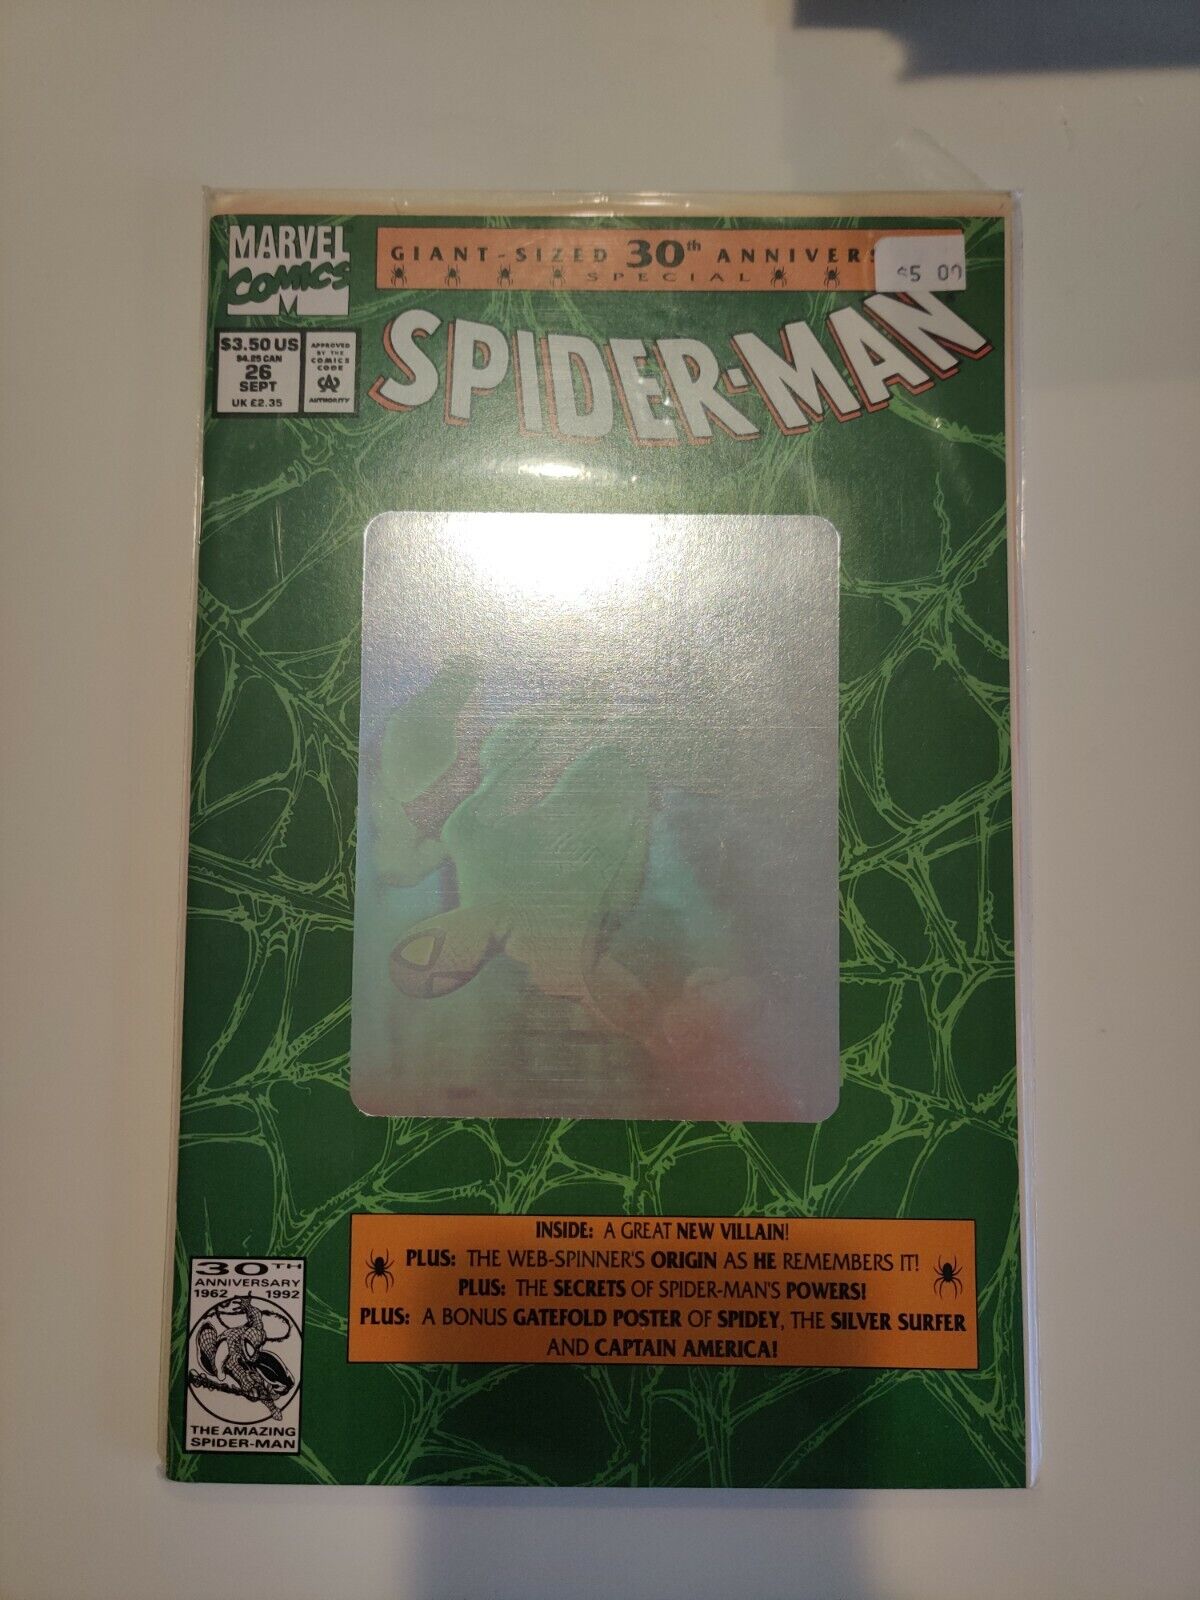 The Amazing Spider-Man #26 NM 1992 30th Anniversary Super Sized Green Cover 